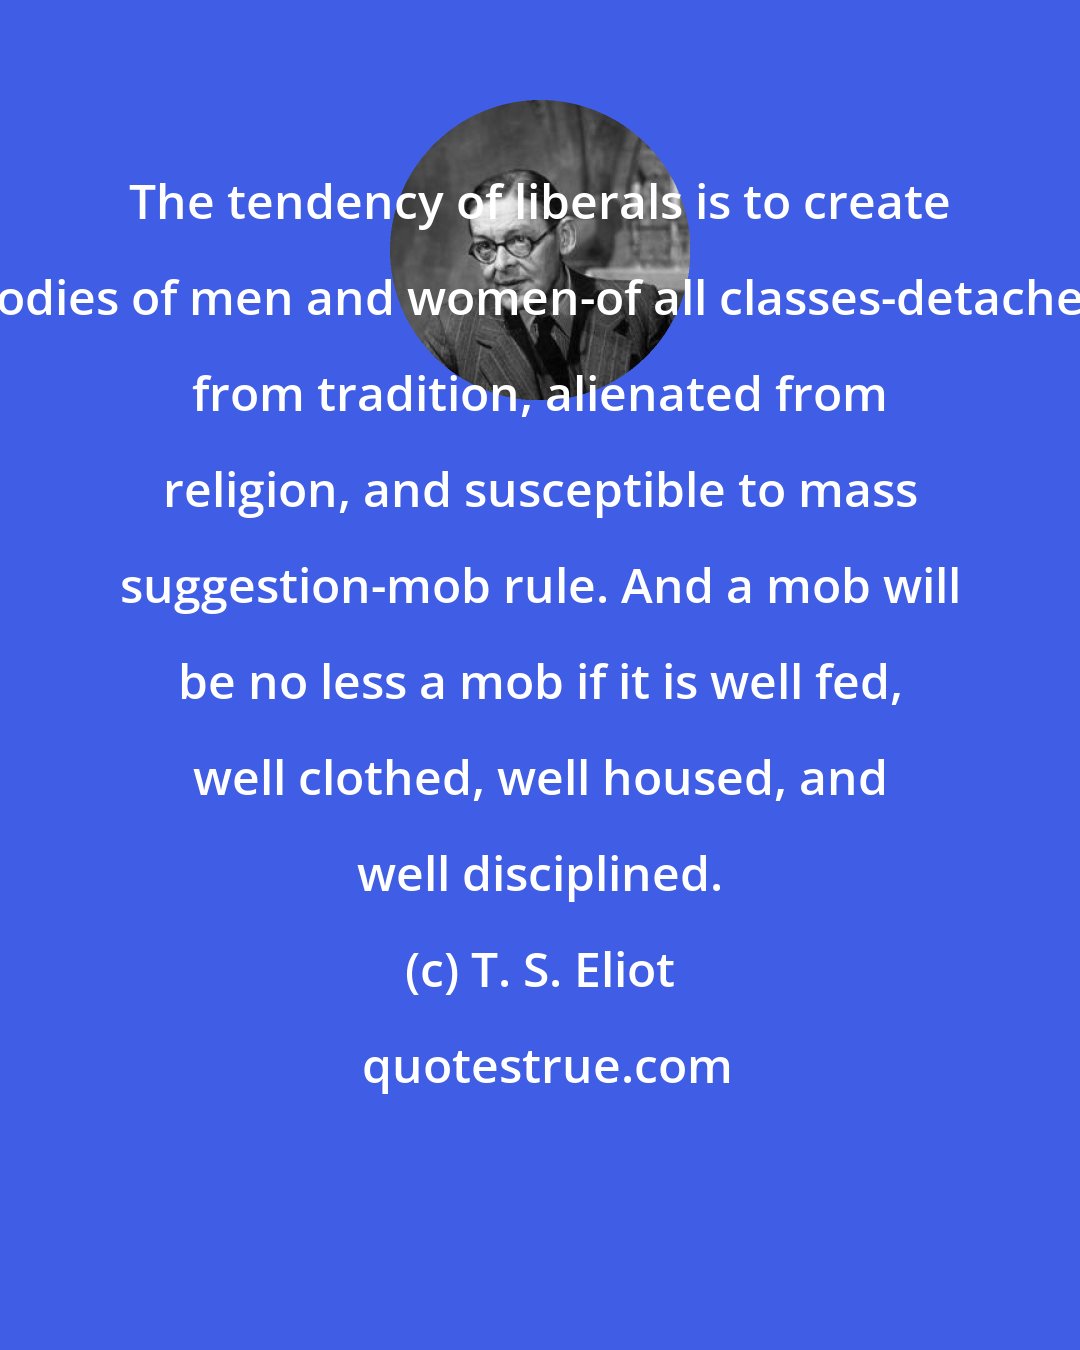 T. S. Eliot: The tendency of liberals is to create bodies of men and women-of all classes-detached from tradition, alienated from religion, and susceptible to mass suggestion-mob rule. And a mob will be no less a mob if it is well fed, well clothed, well housed, and well disciplined.